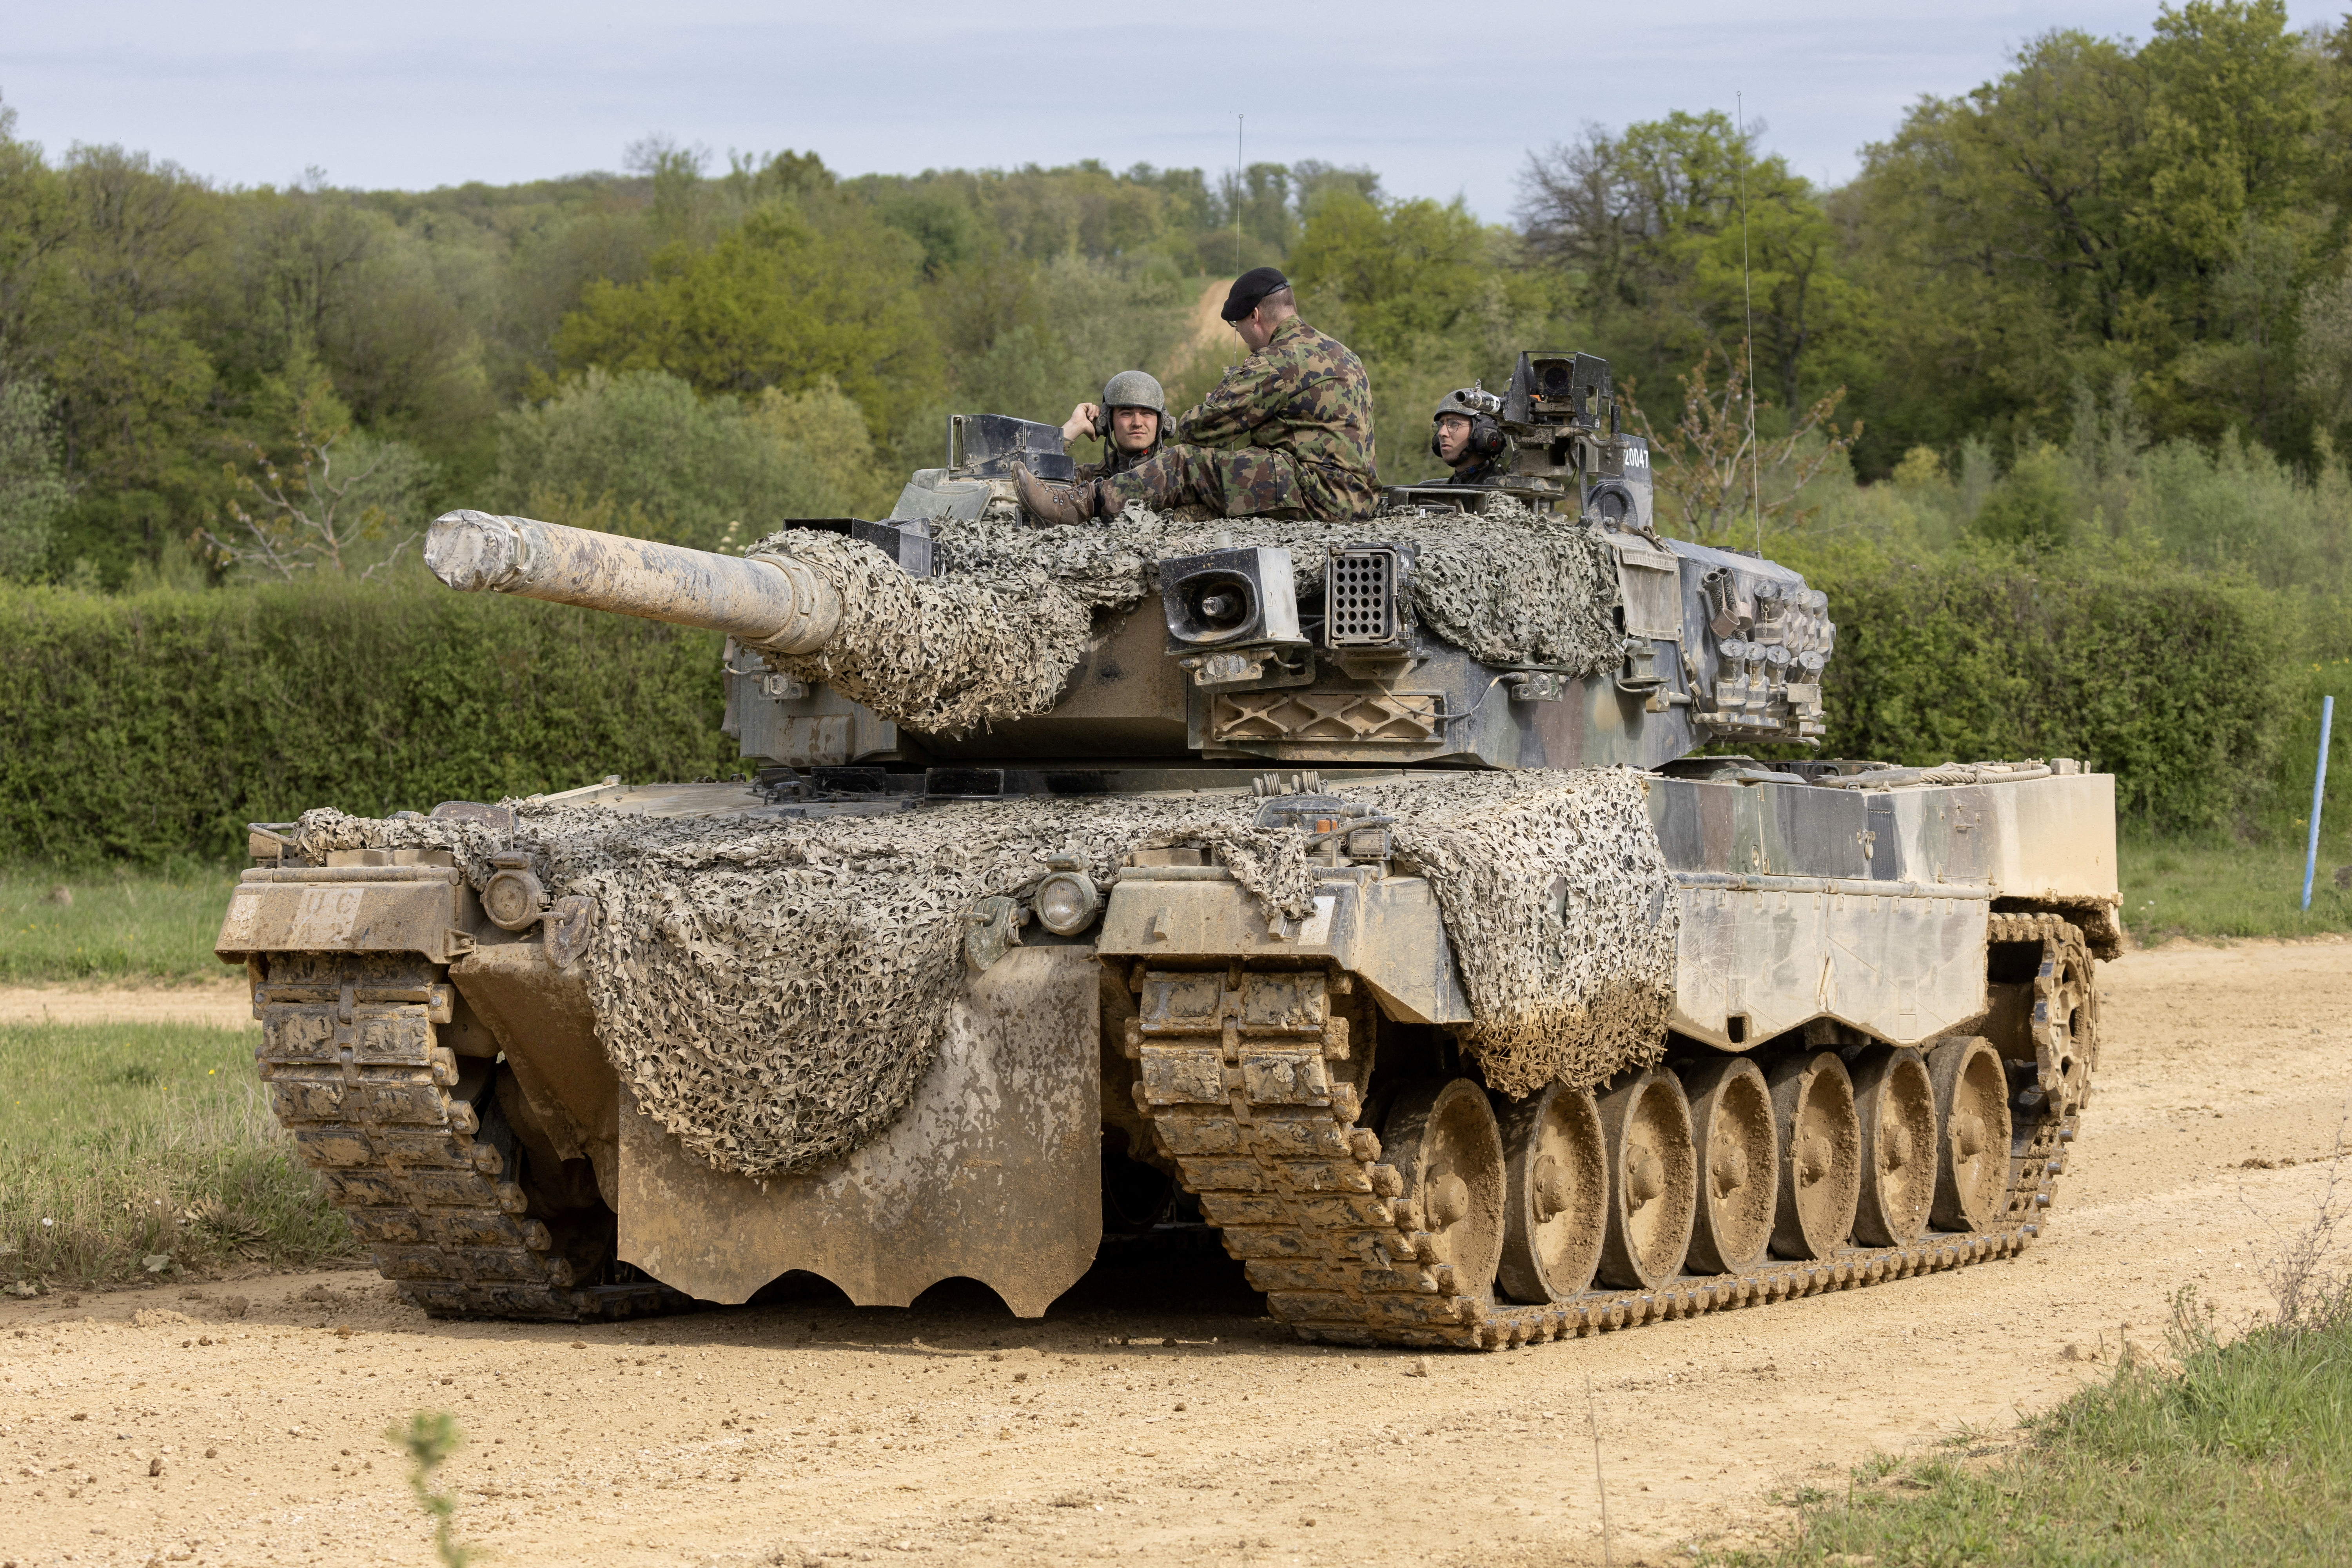 to buy 18 Leopard 2 tanks to stocks -sources | Reuters